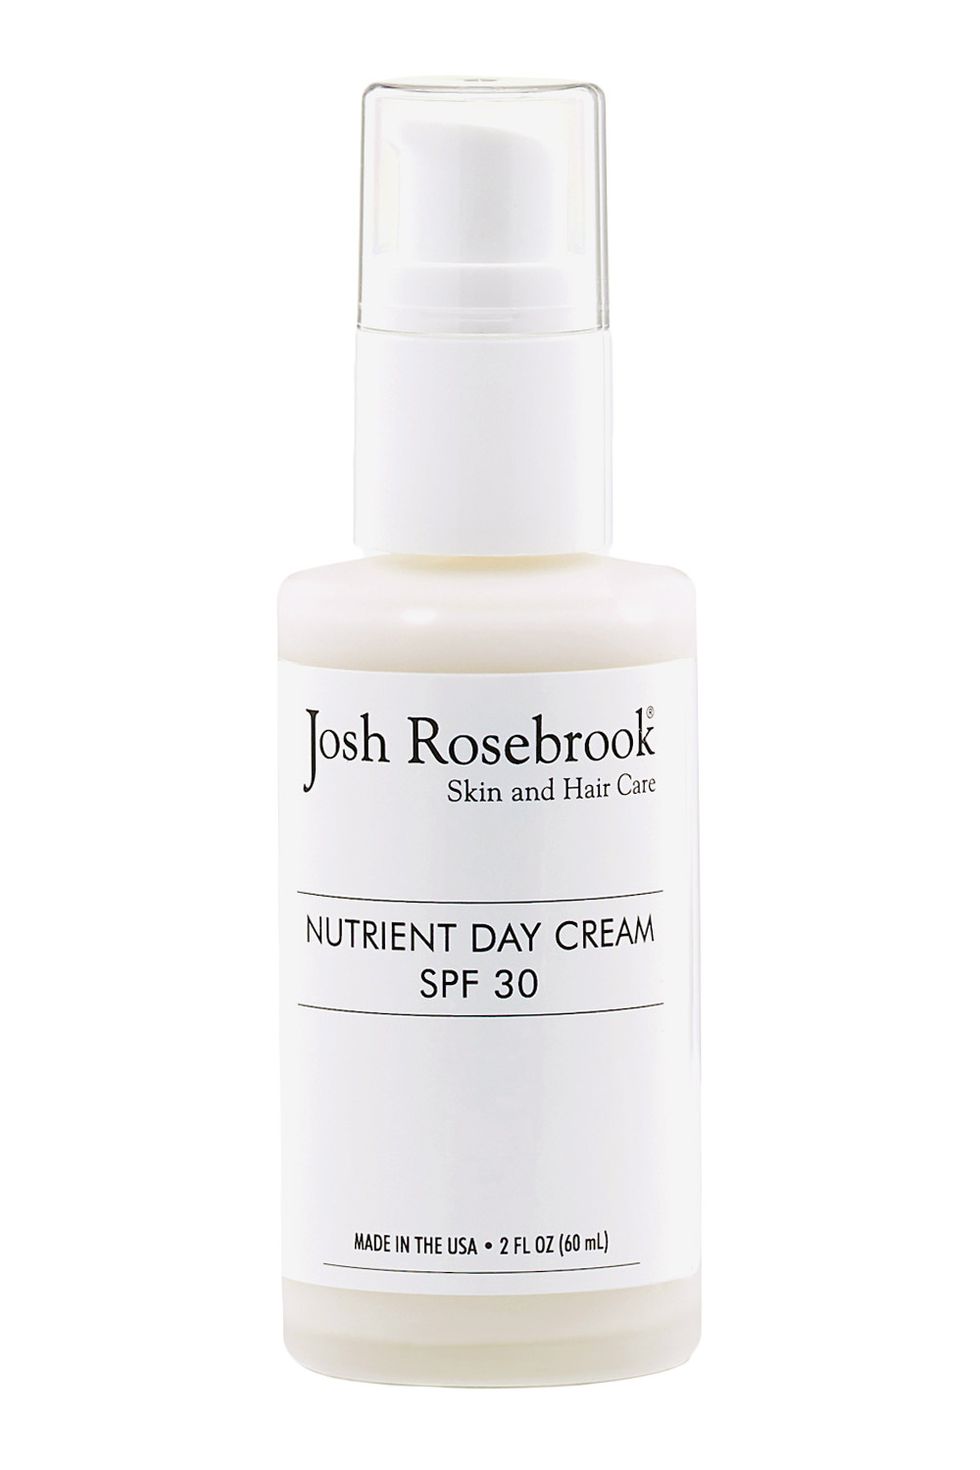 <p><strong>Josh Rosebrook Nutrient Day Cream SPF 30</strong> is a natural blend that's formulated with tiny particles of UV-blocking mineral zinc<span class="redactor-invisible-space">, and a bevy of organic oils and botanicals. Bonus: It<span class="redactor-invisible-space"> infuses skin with antioxidants and calming ingredients<span class="redactor-invisible-space">, and won't leave a telltale white "ghosting" effect behind. </span></span></span><em>$85, <a href="http://joshrosebrook.com/products/nutrient-day-cream-with-spf-30-non-nano-zinc-oxide?variant=733457109" target="_blank">joshrosebrook.com</a></em></p>